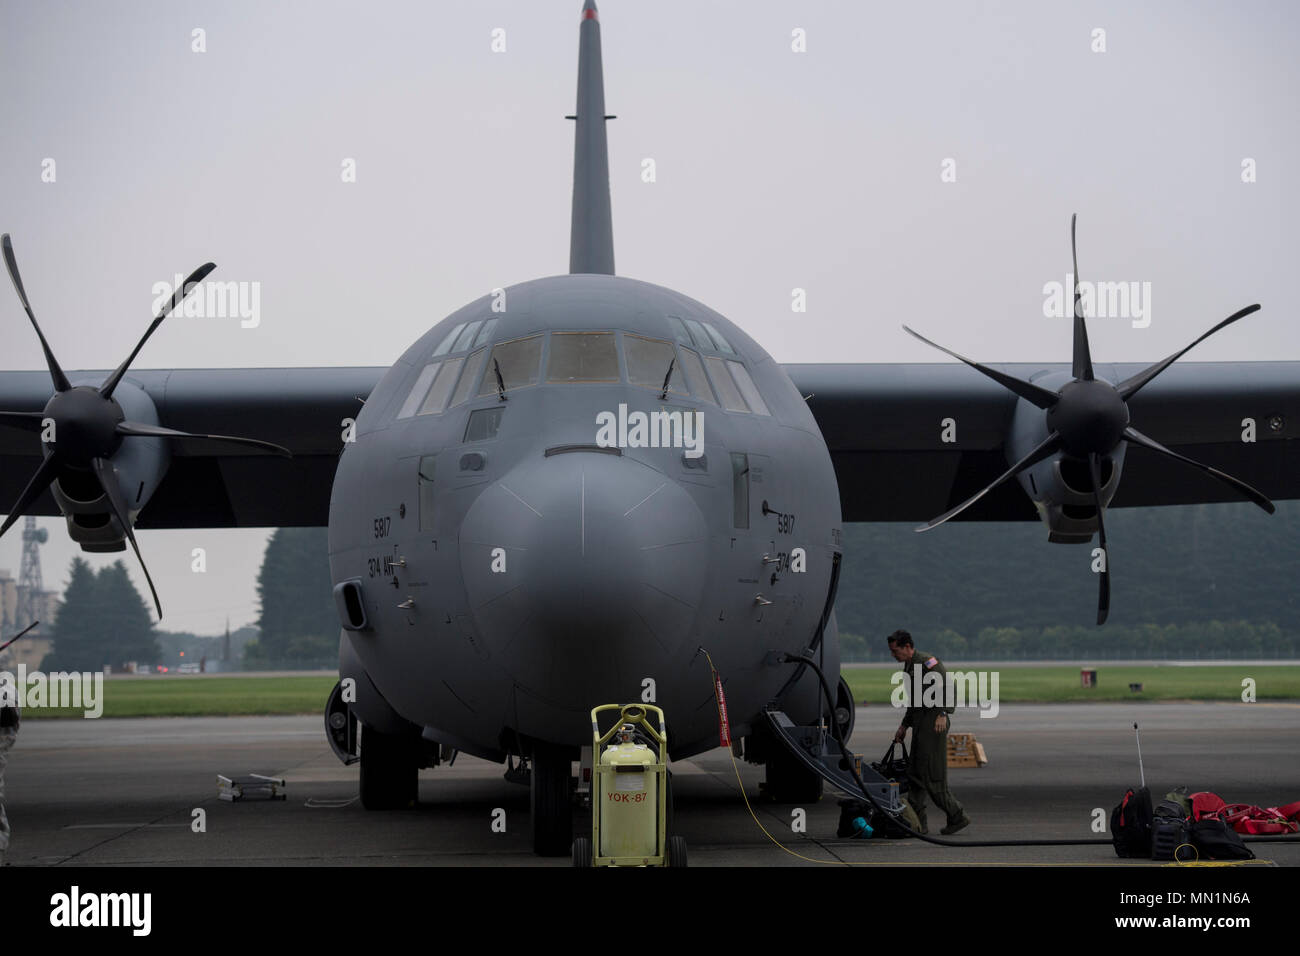 Crew member from the 36th Airlift Squadron unloads luggage from a C-130J Super Hercules at Yokota Air Base, Japan, Aug. 10, 2017. This is the fourth C-130J delivered to Yokota AB from Lockheed Martin facility. The new C-130J is 81% quieter during takeoff, 14% faster, can travel 1,287 km further, and can carry 4,090 kg more than its predecessor, the C-130H Hercules. (U.S. Air Force photo by Yasuo Osakabe) Stock Photo